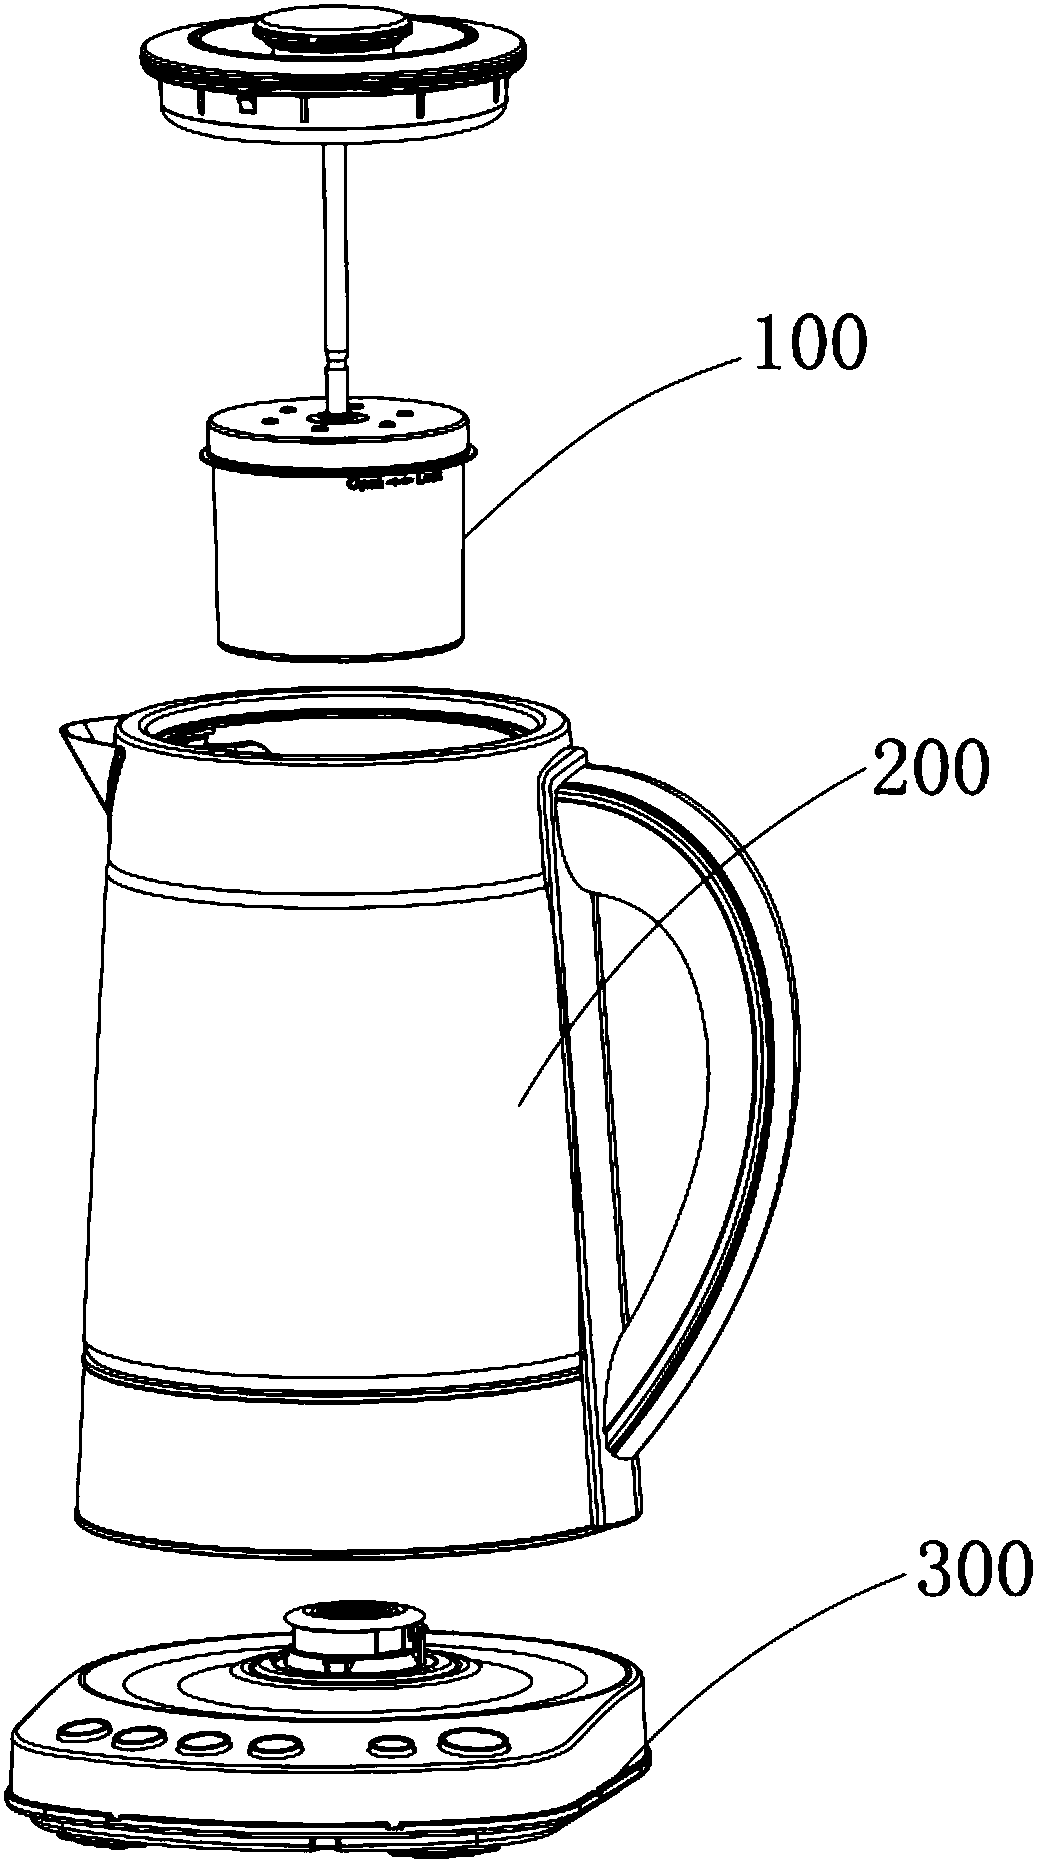 Tea making component and tea steaming health pot